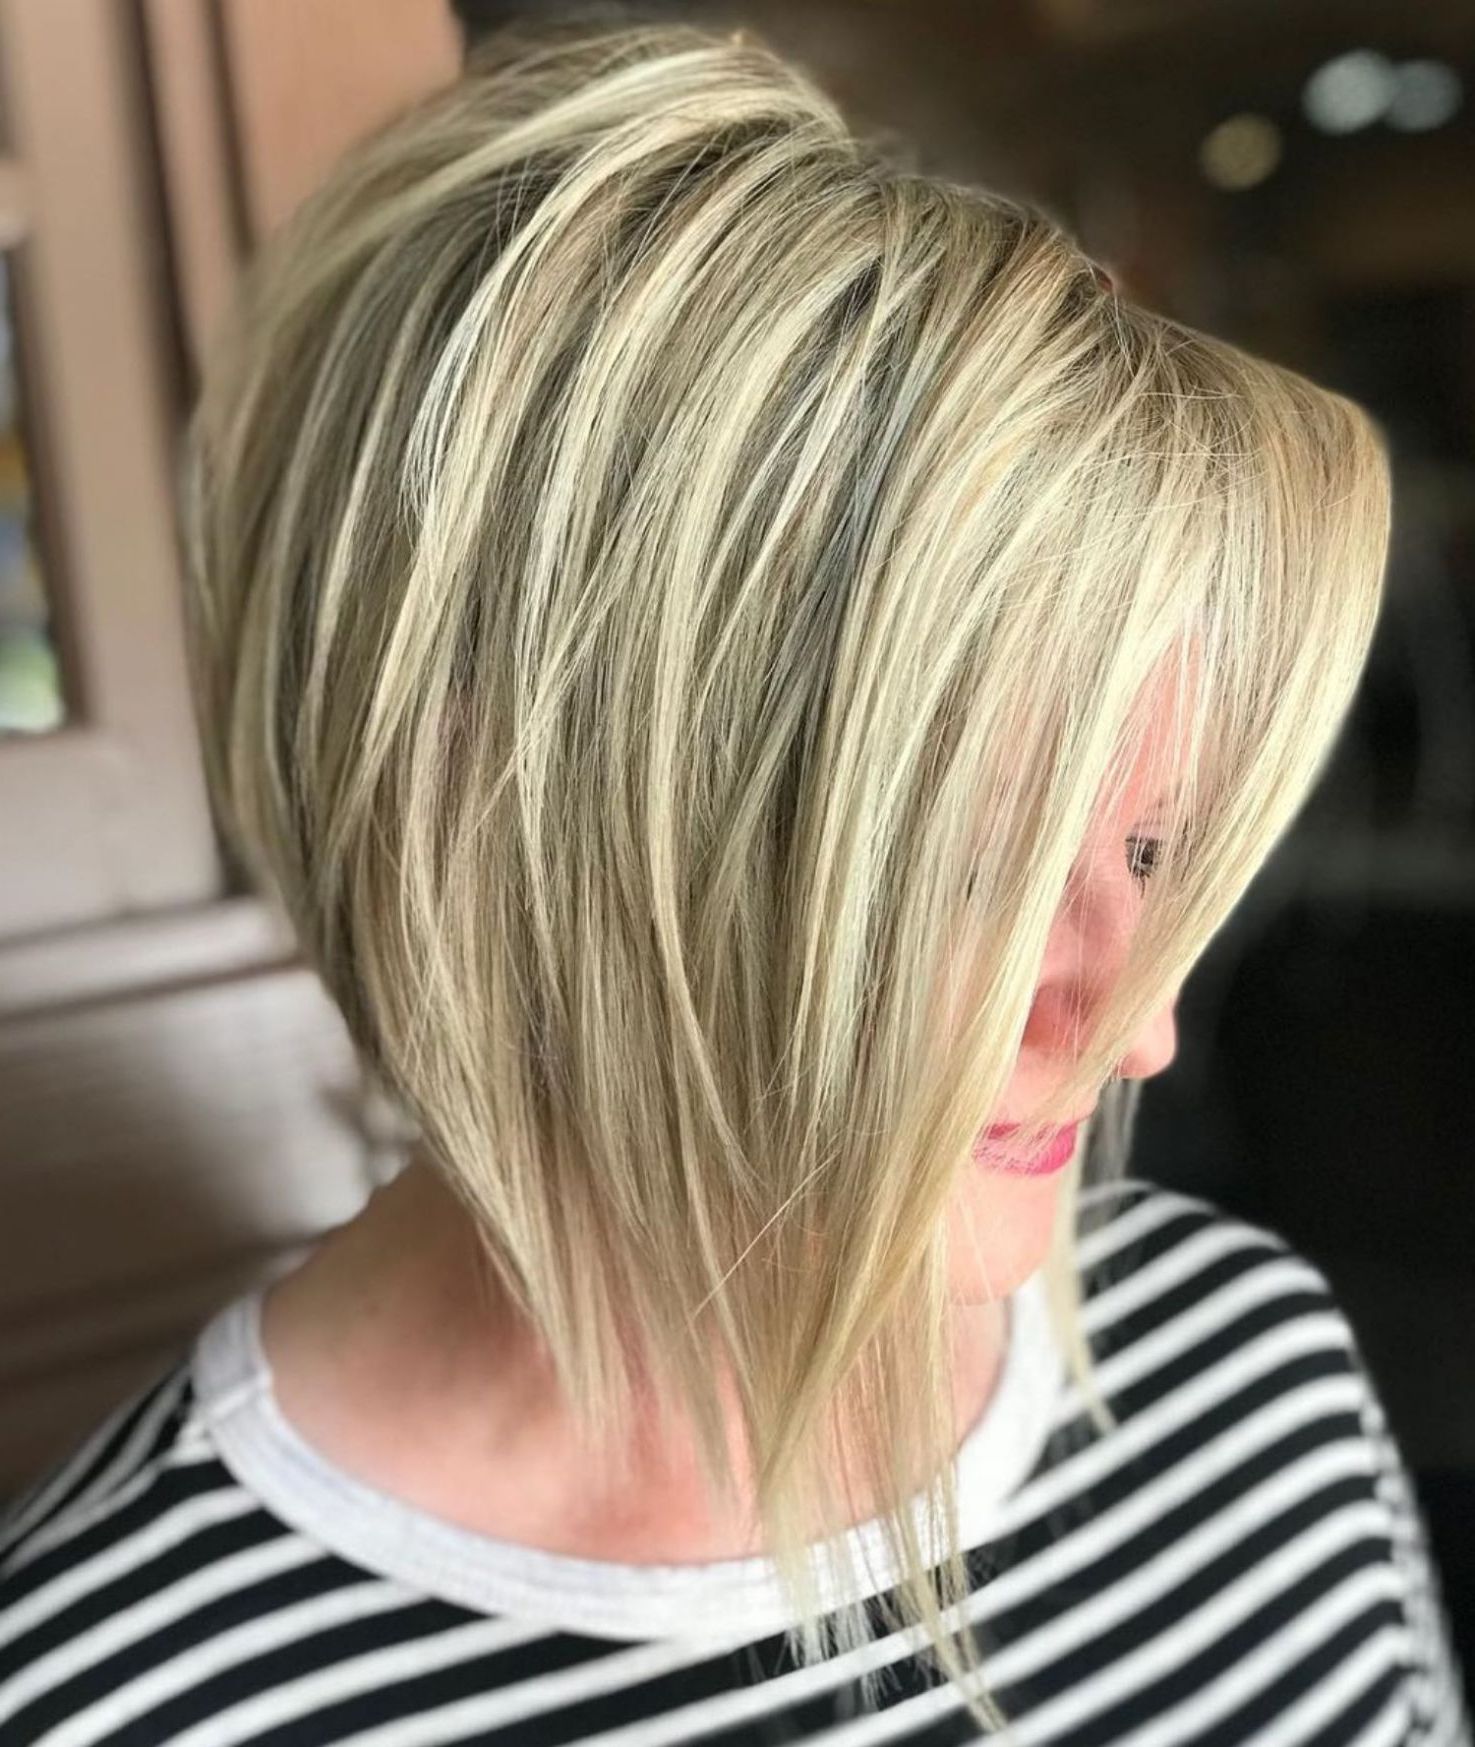 Latest Side Parted Layered Bob Haircuts In 60 Layered Bob Styles: Modern Haircuts With Layers For Any (View 3 of 20)